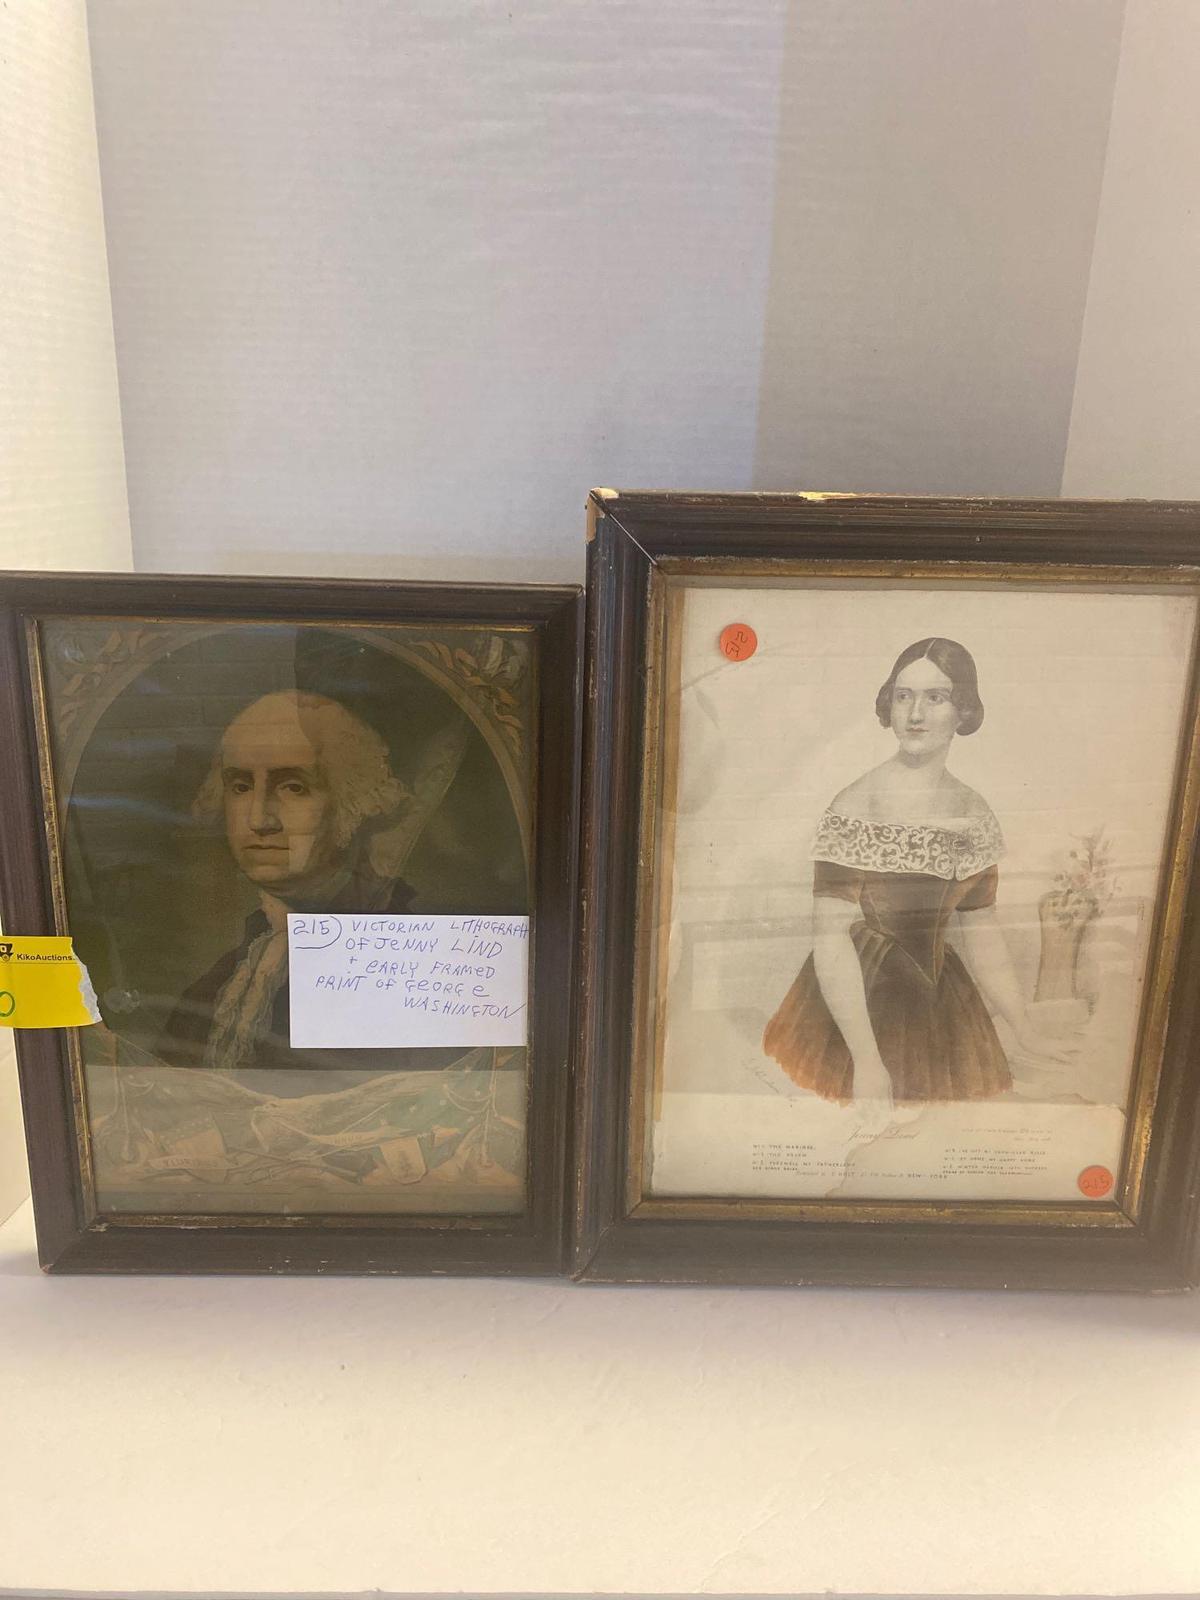 Victorian lithograph of Jenny Lind and early framed print of George Washington